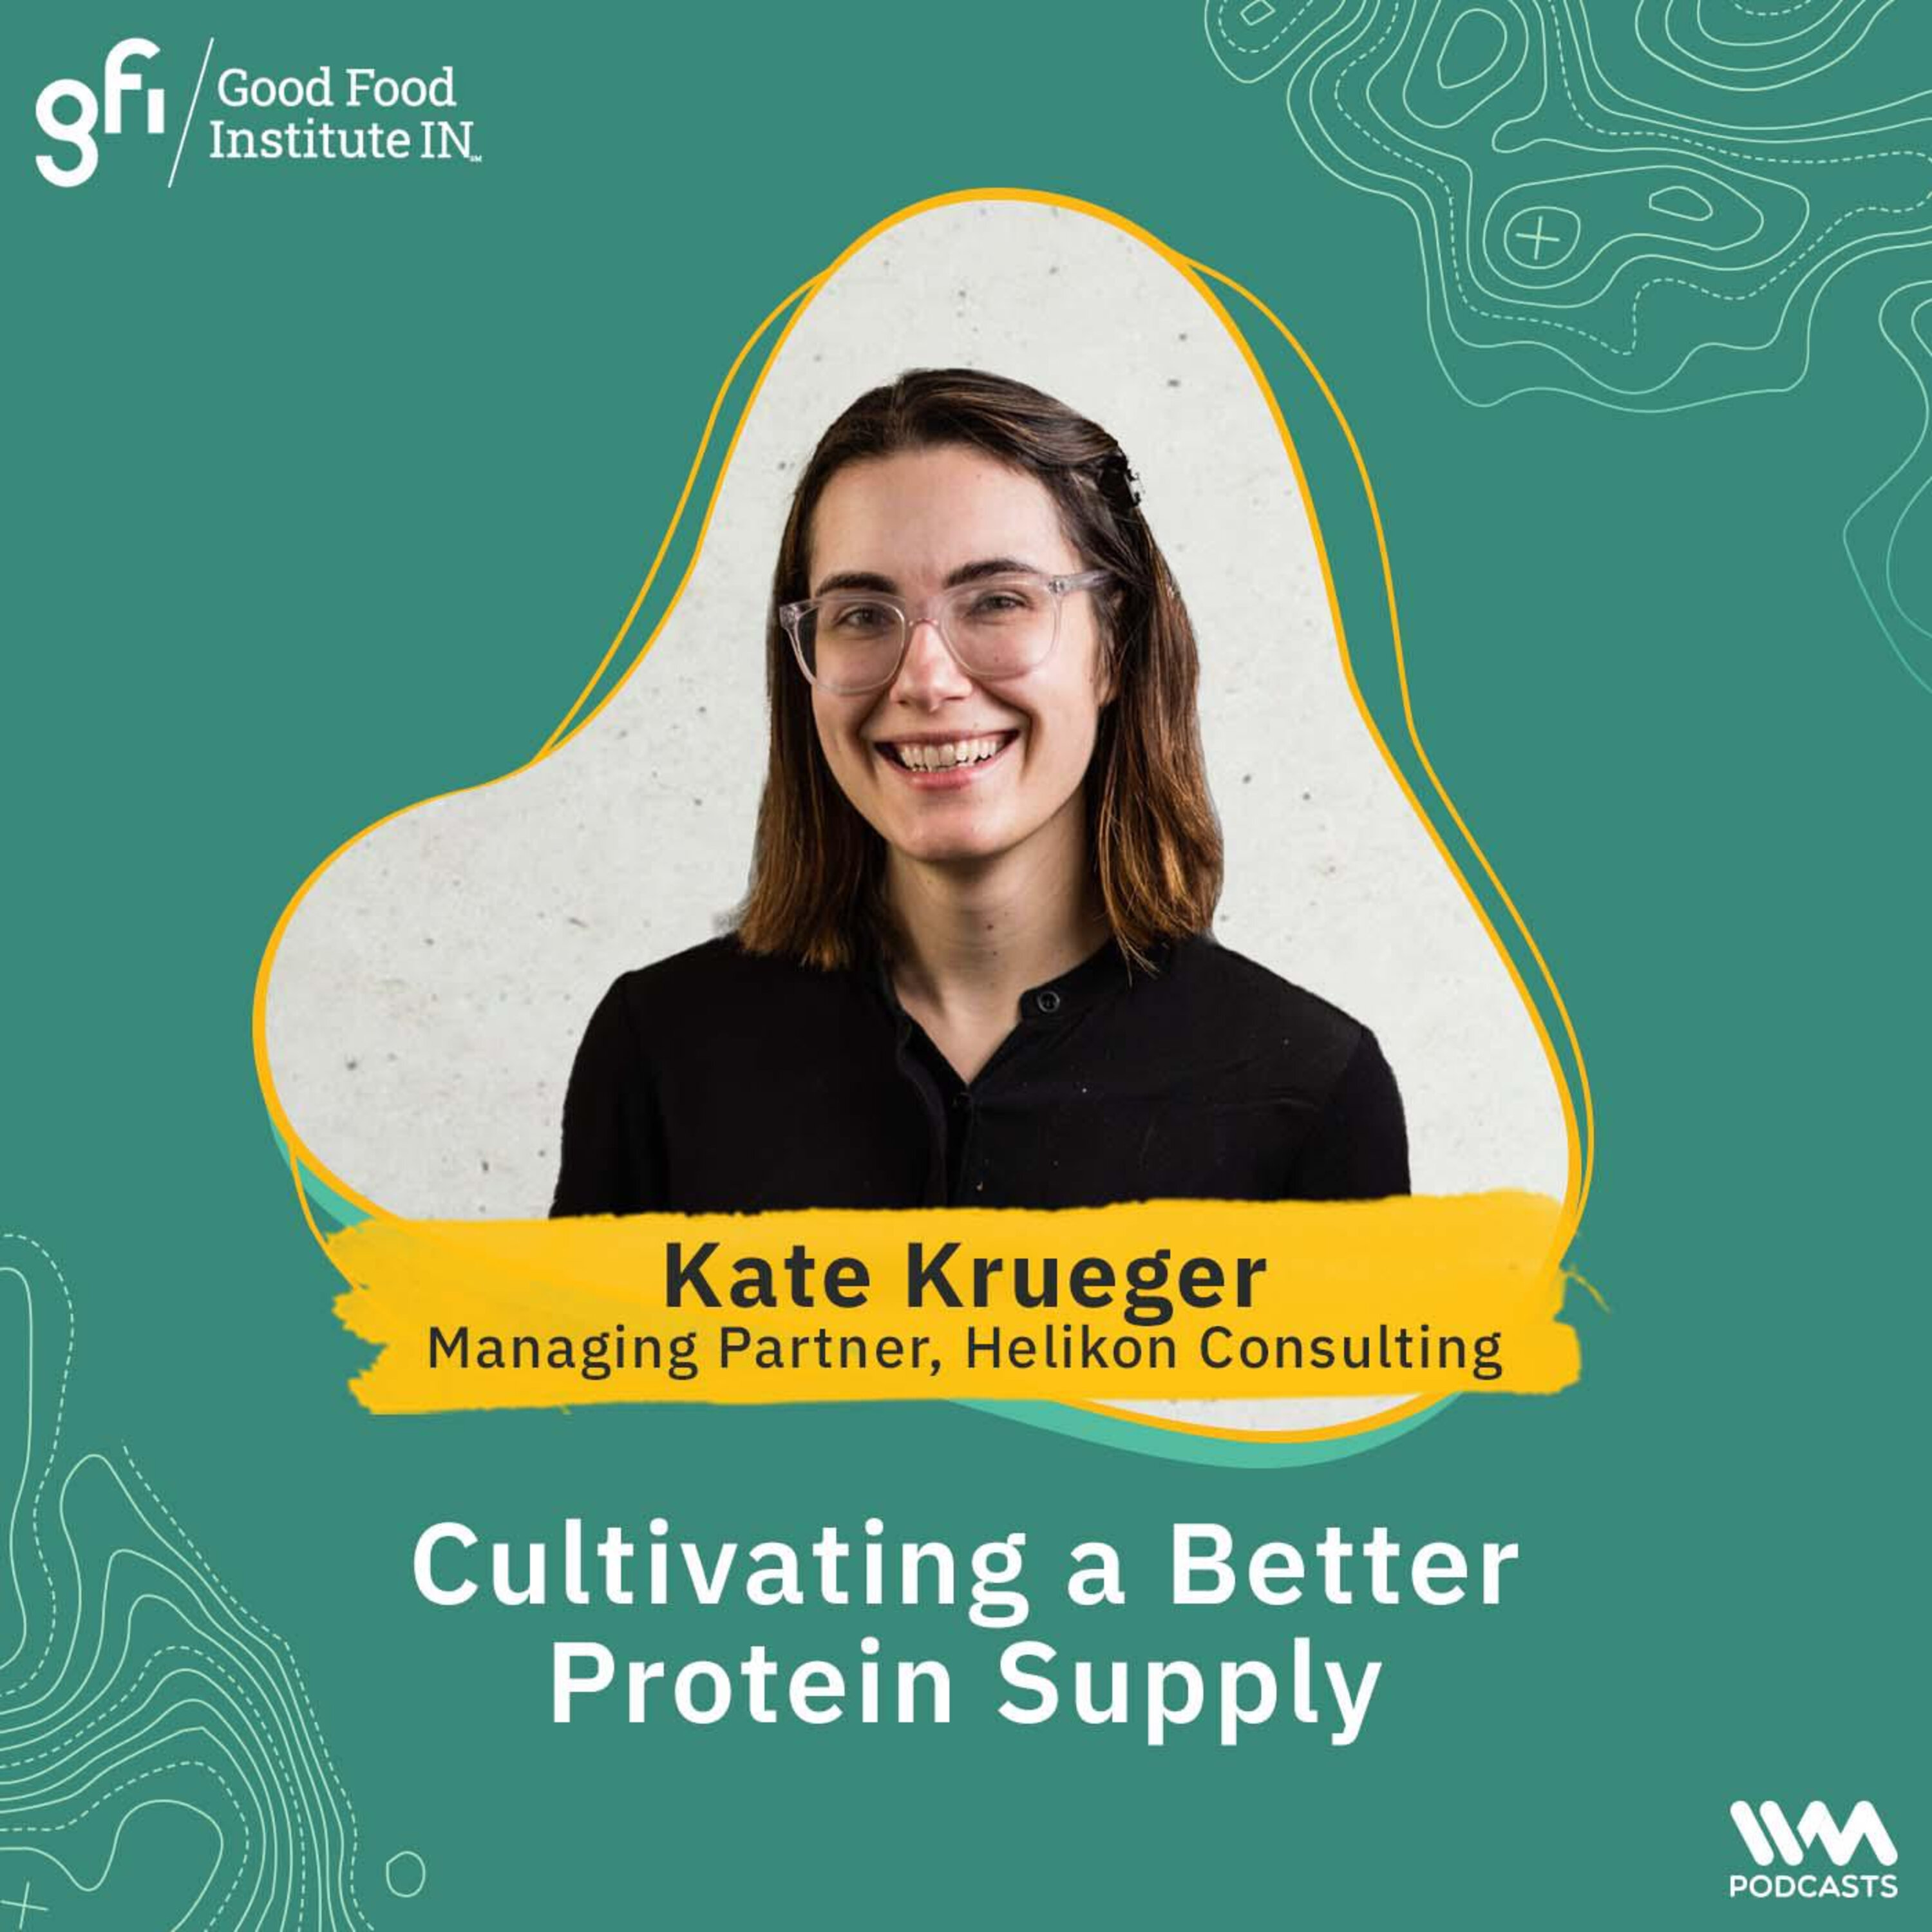 Kate Krueger on Cultivating a Better Protein Supply